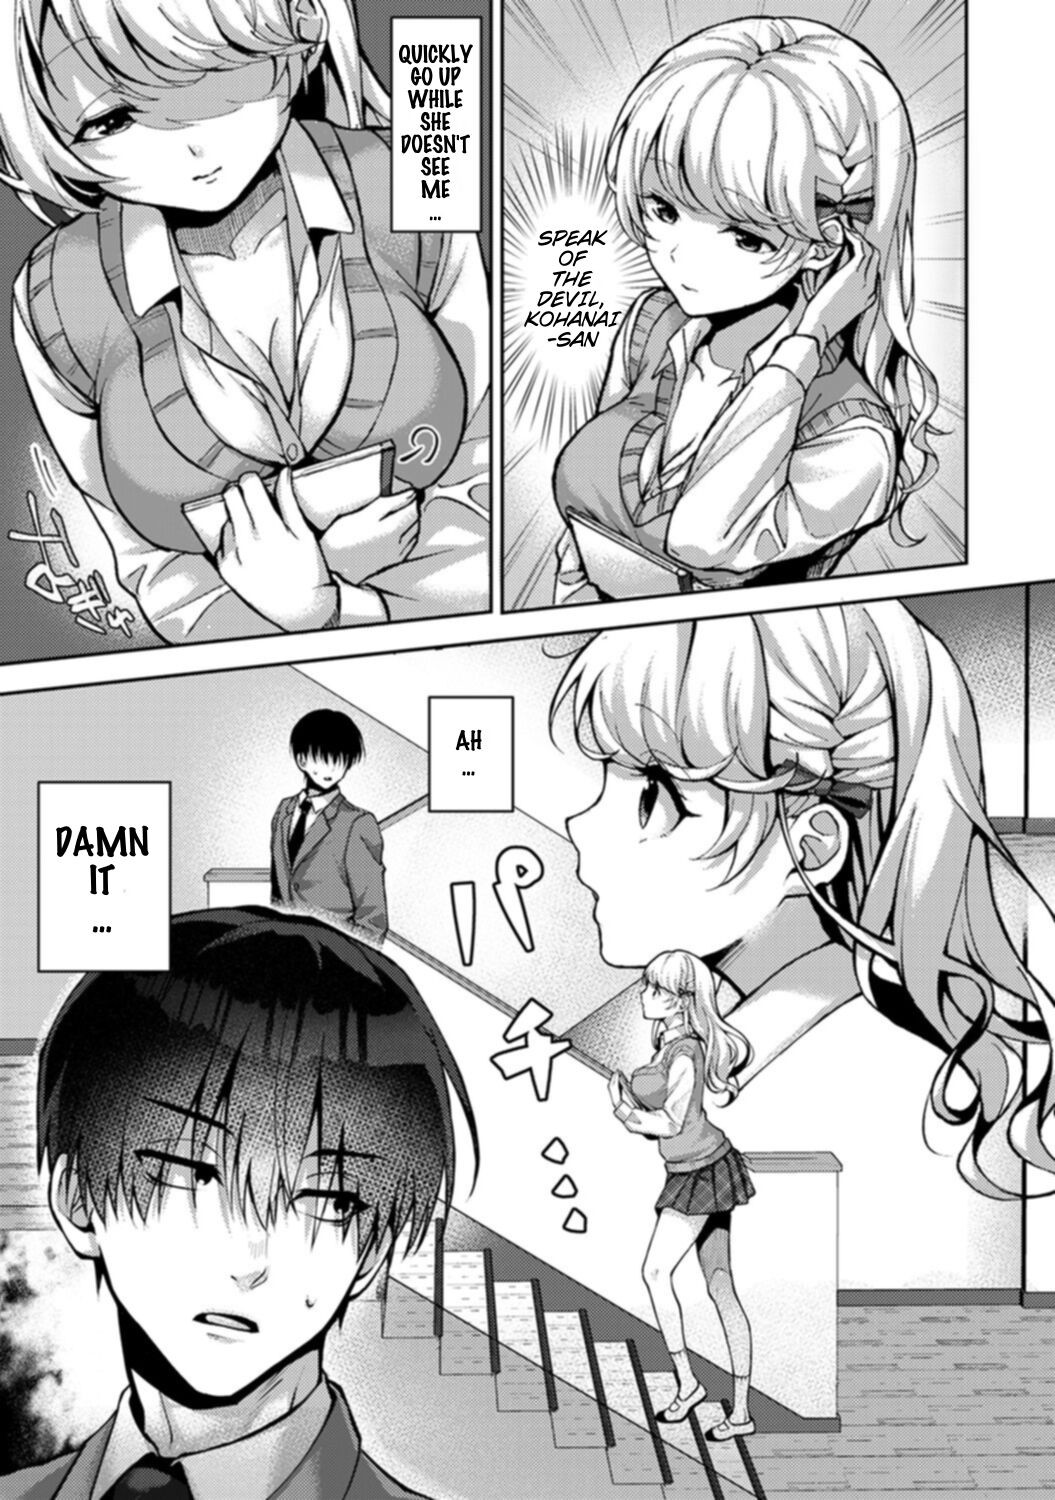 Hentai Manga Comic-My Classmate Is a Young Seductress Who Only Has Eyes For Me-Chapter 2-4